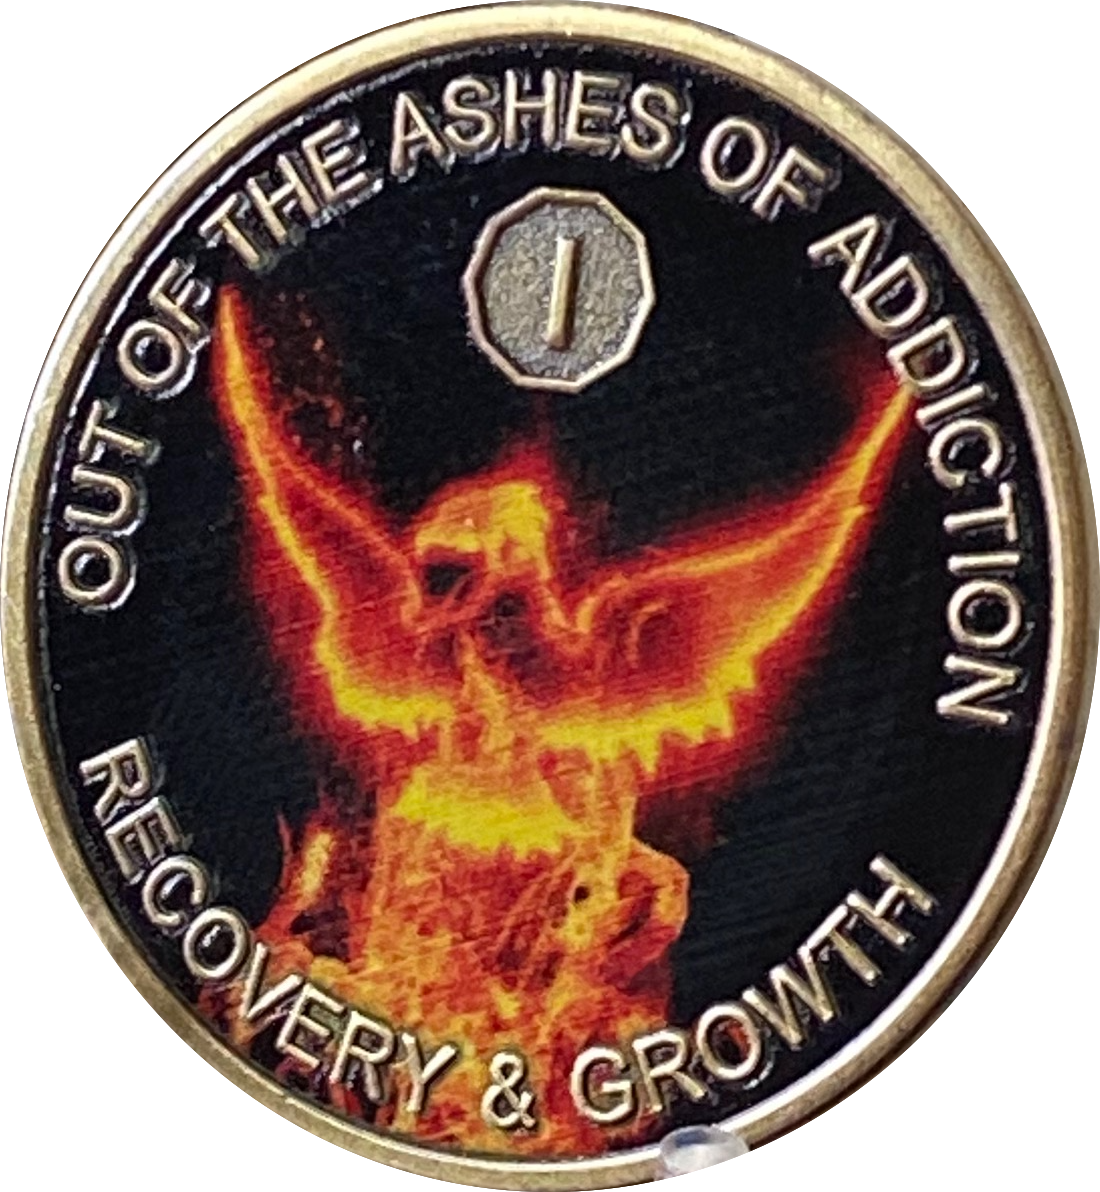 1 Year Out Of The Ashes Of Addiction Phoenix Flames Medallion Serenity Prayer Back